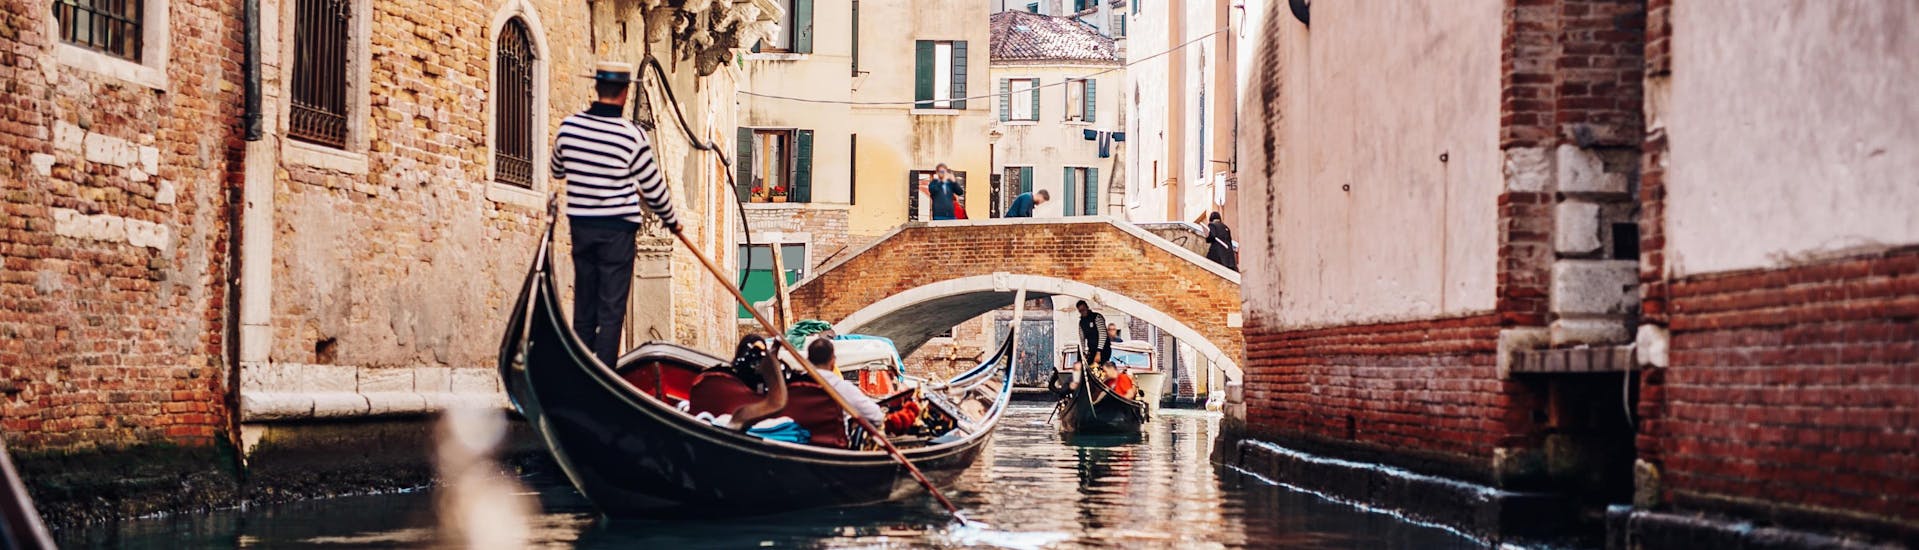 A gondolier is paddling through a narrow canal on a gondola ride in Venice.